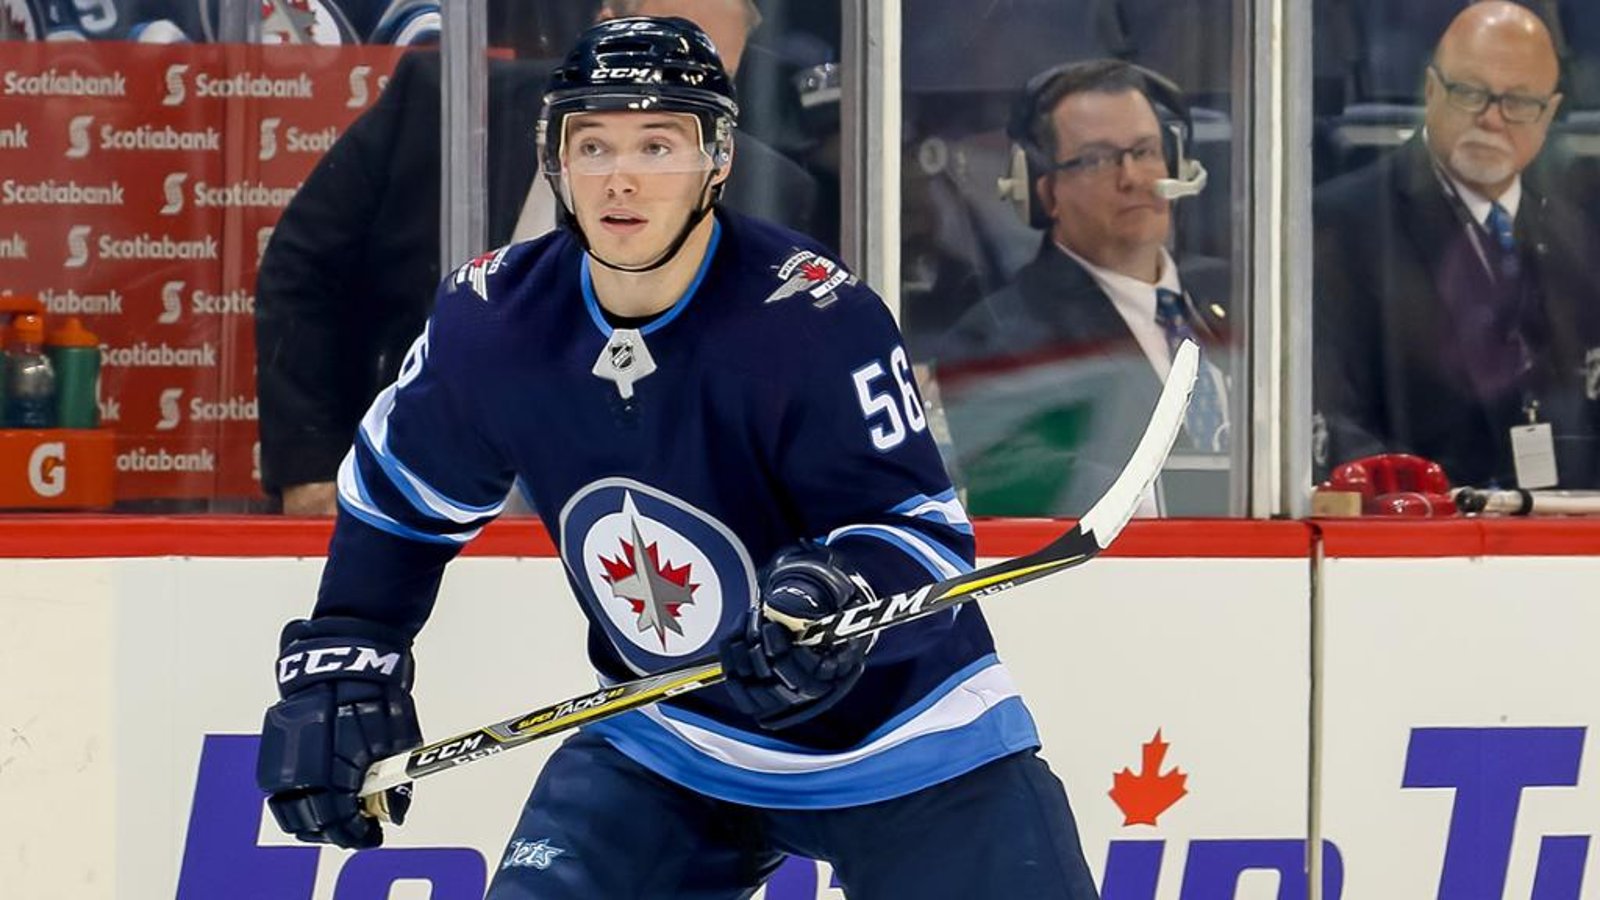 Breaking: Jets recall six players ahead of Game 5 